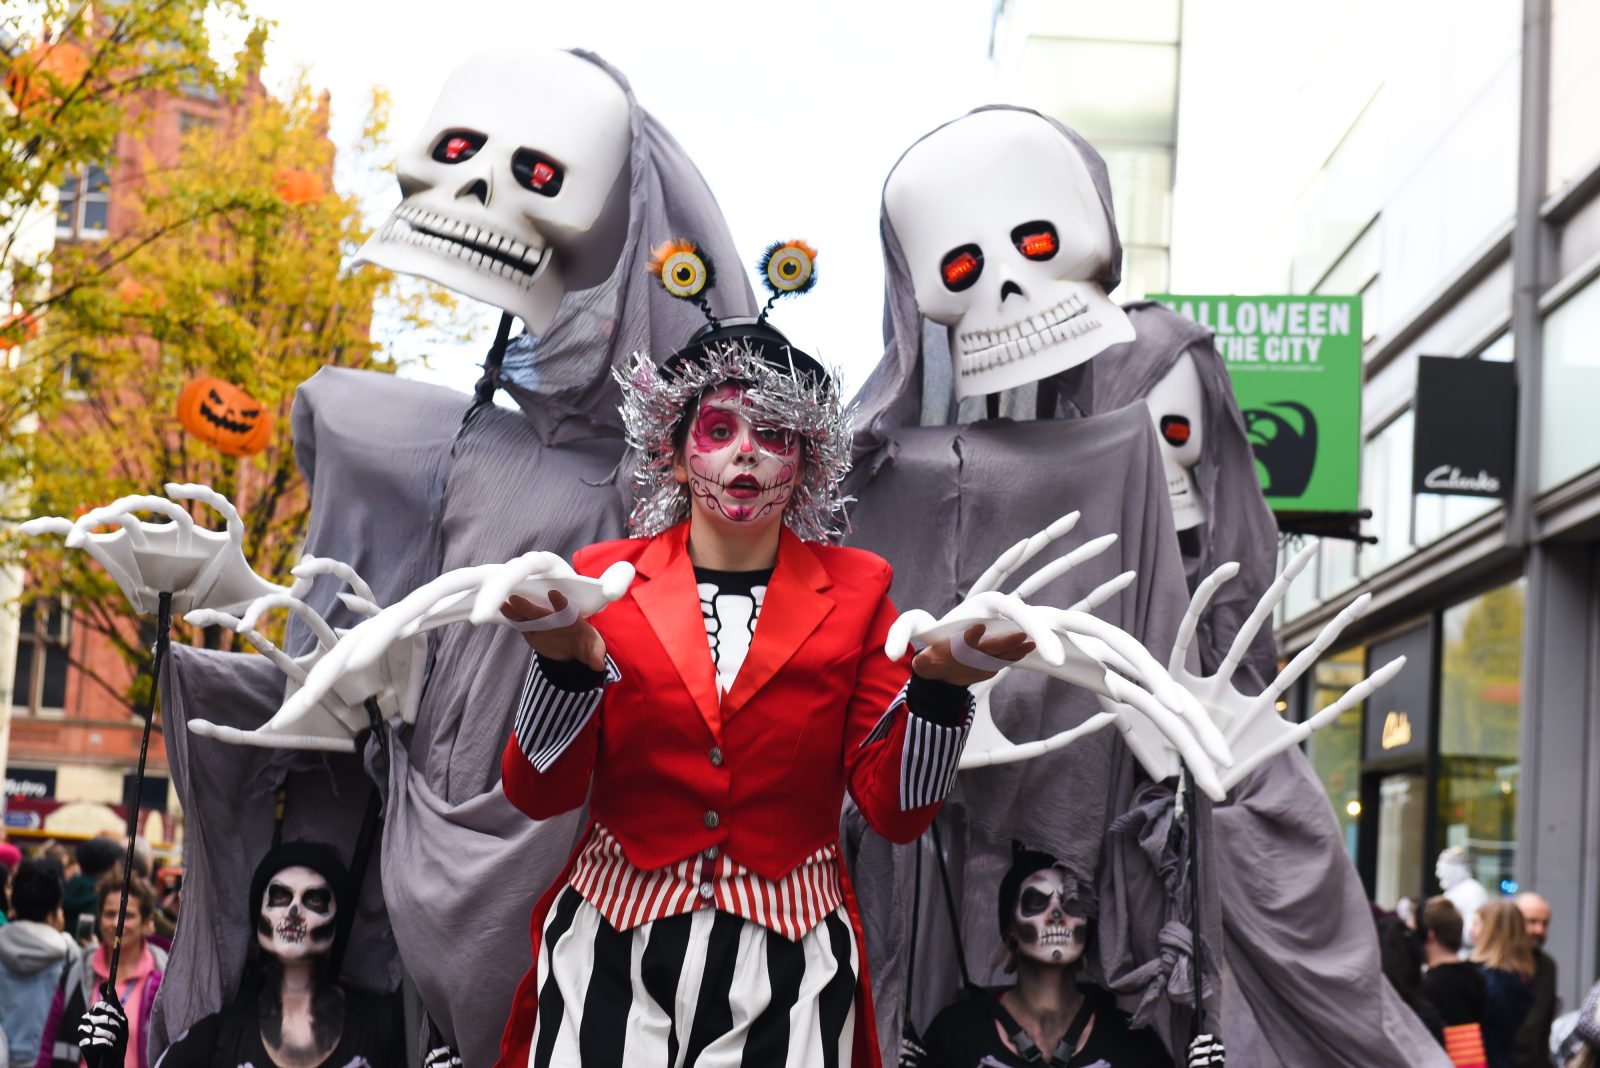 Giant inflatable monsters are returning to Manchester for Halloween, The Manc